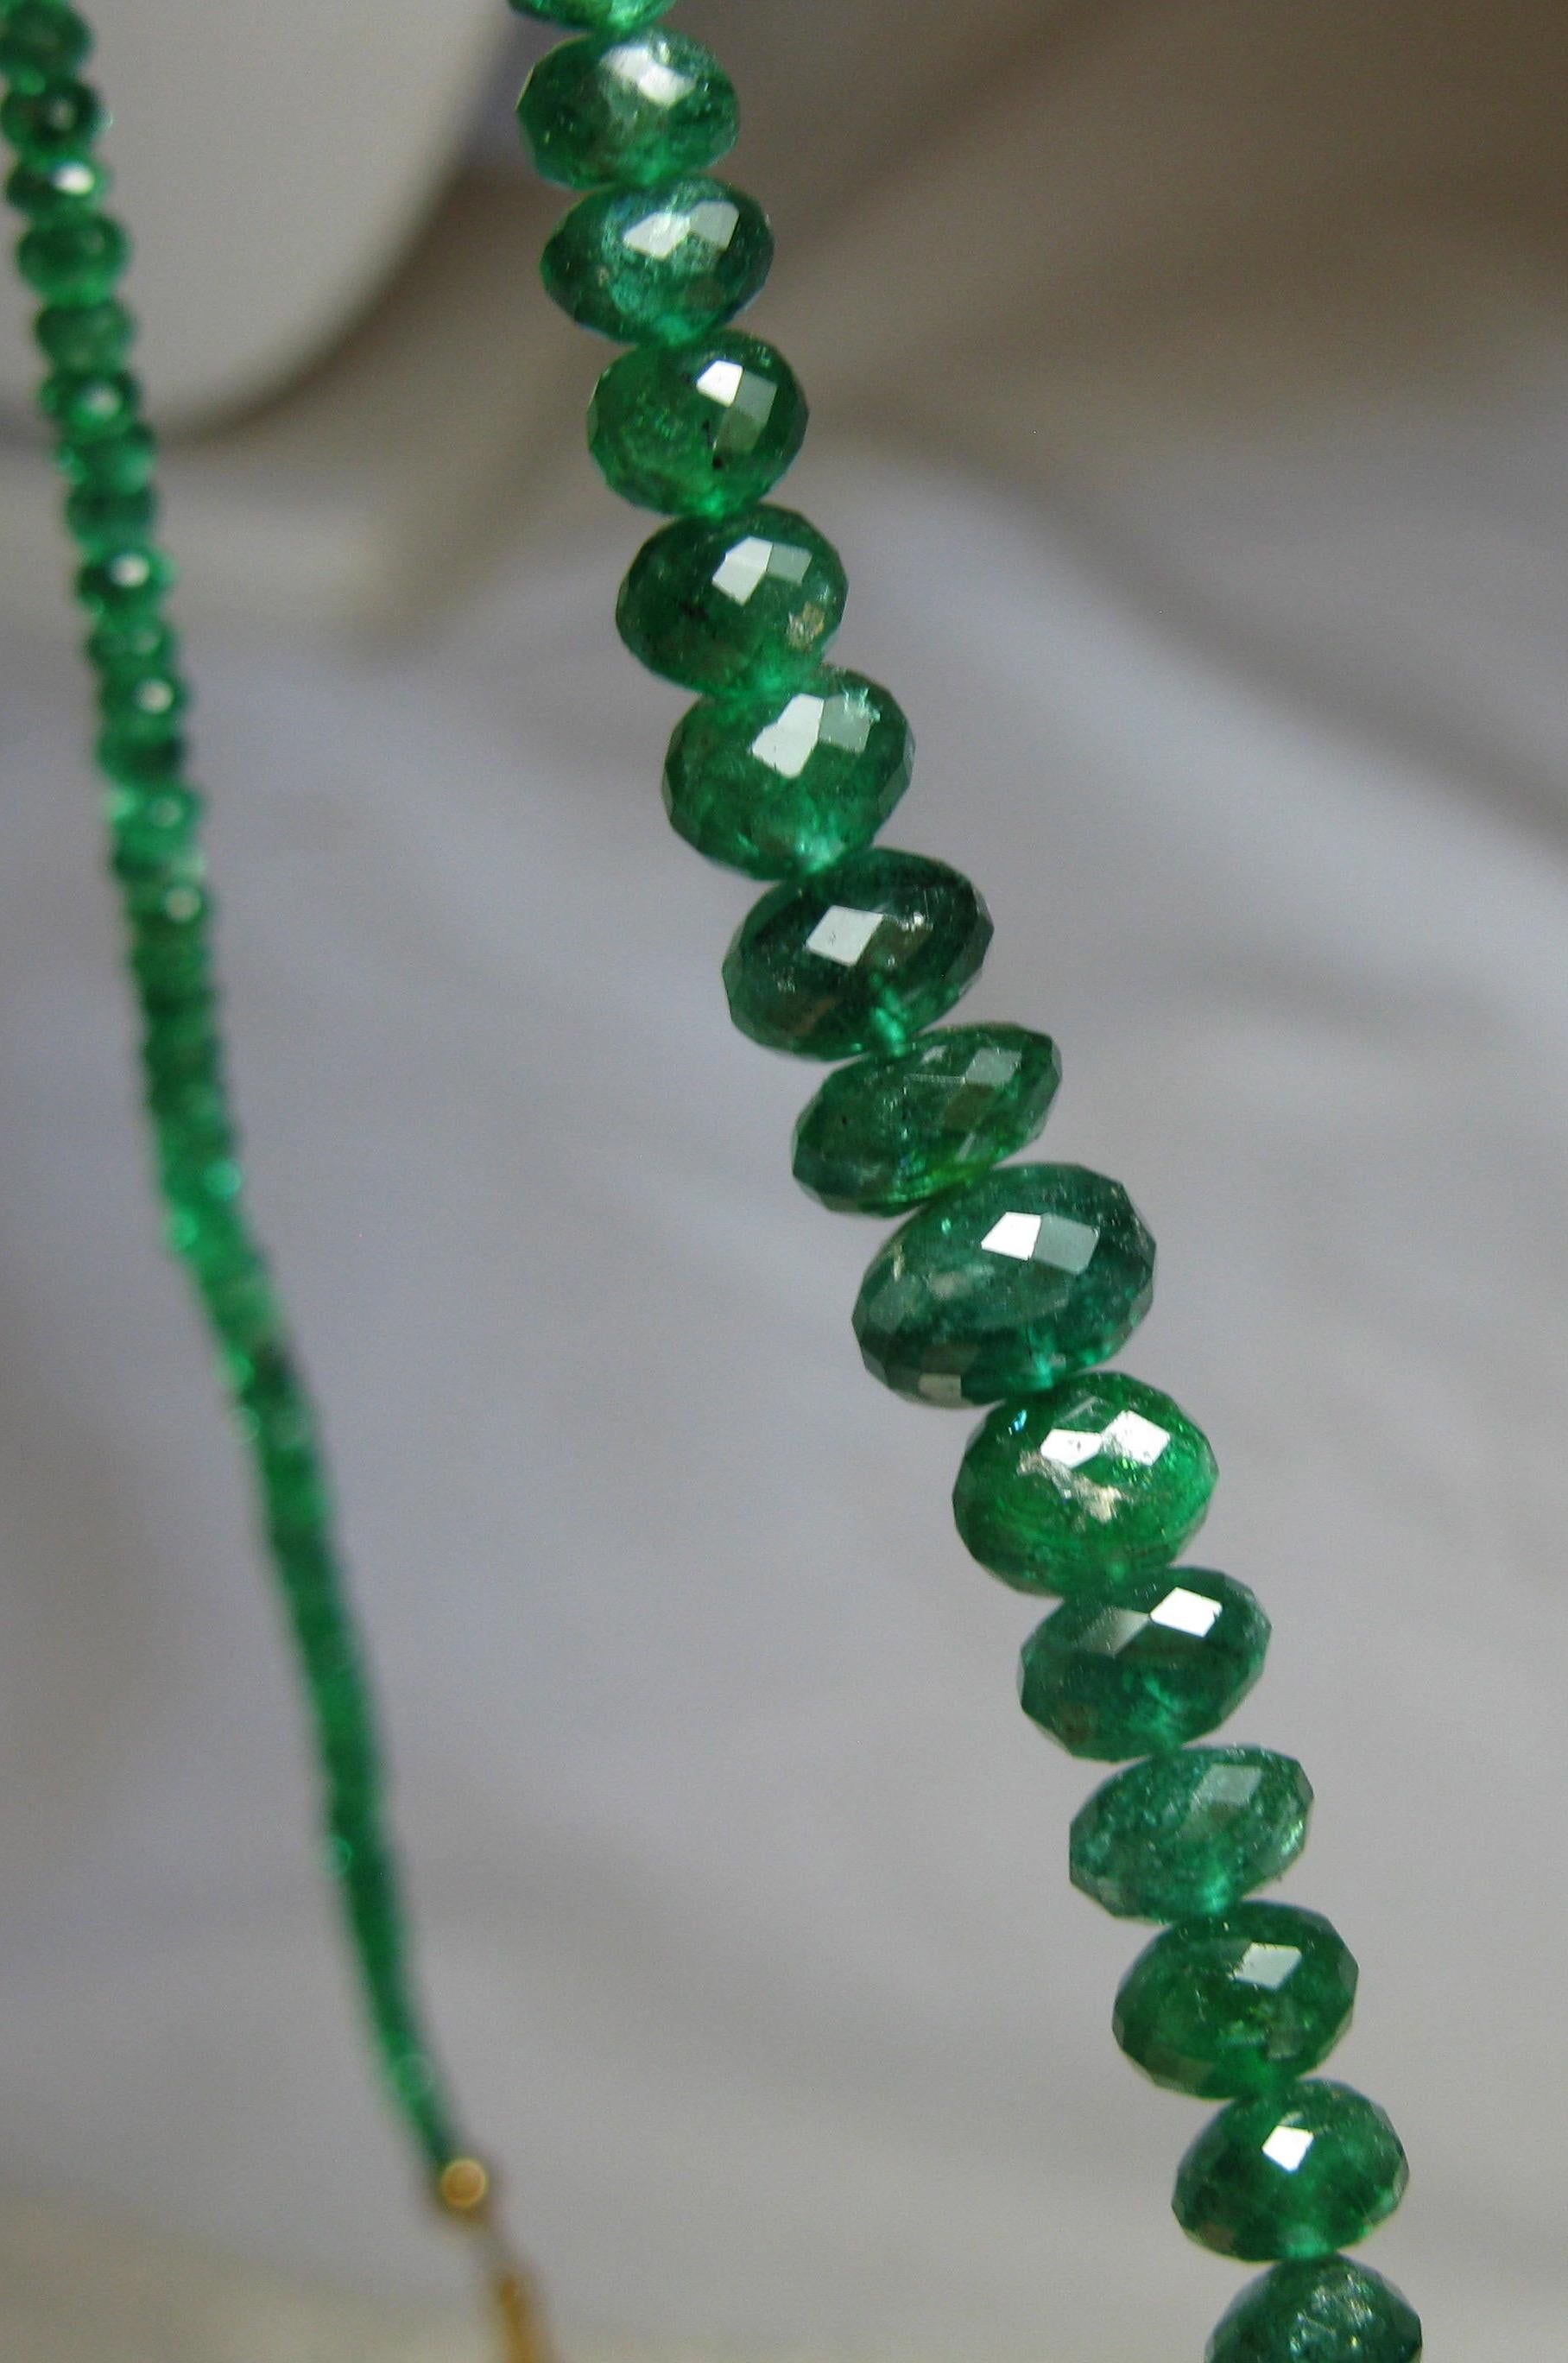 Sparkling Natural Mined Emeralds in faceted graduated beads create this stunning necklace.  The Emerald Necklace is 18 inches long and has a 14 Karat Gold Clasp.   Provenance:  From the estate of New York socialite and style setter Anne Lichtblau